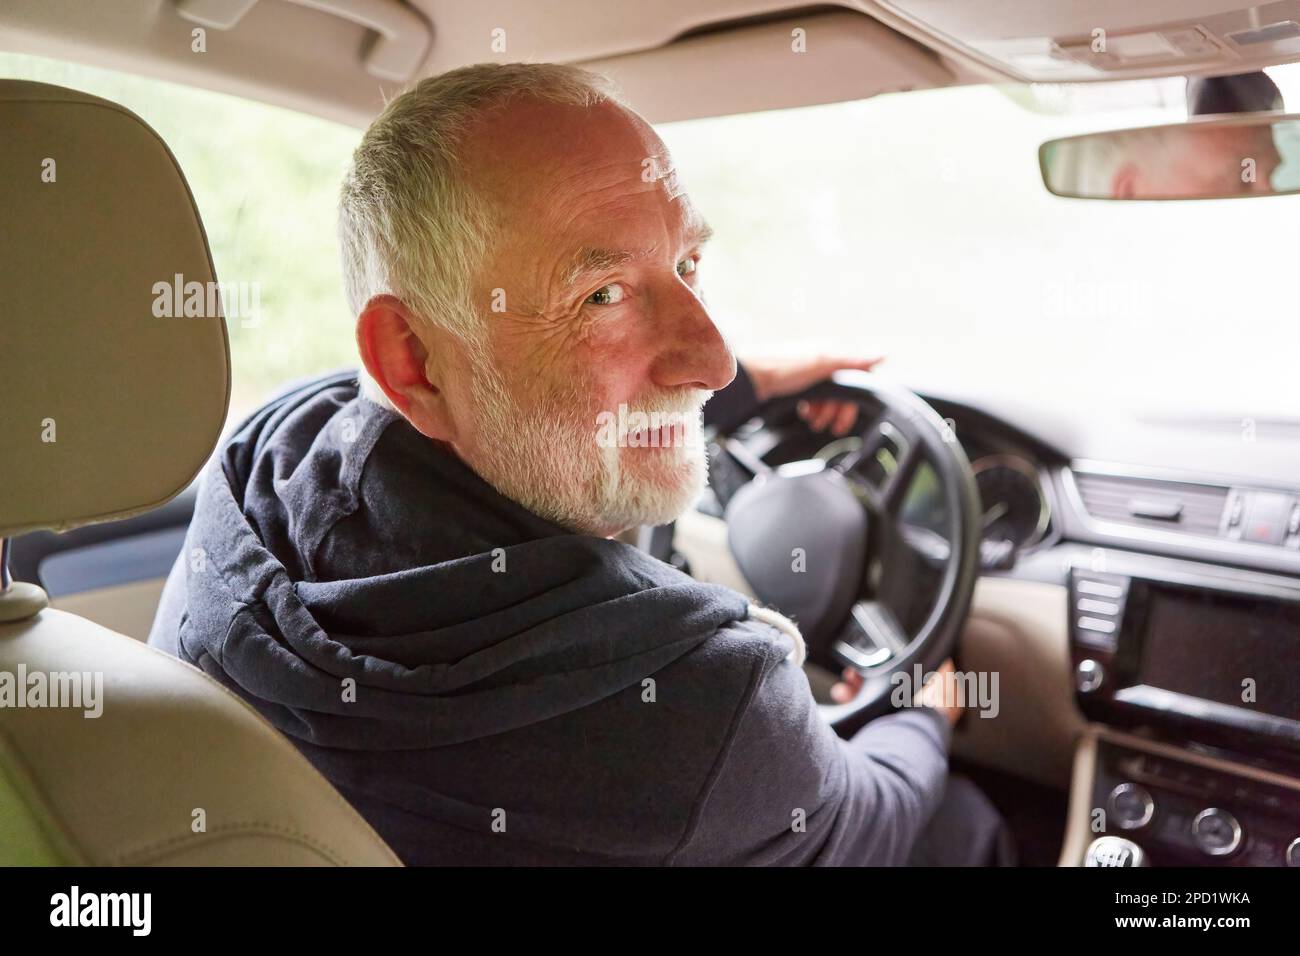 Smiling senior man traveling in car during road trip on vacation Stock Photo